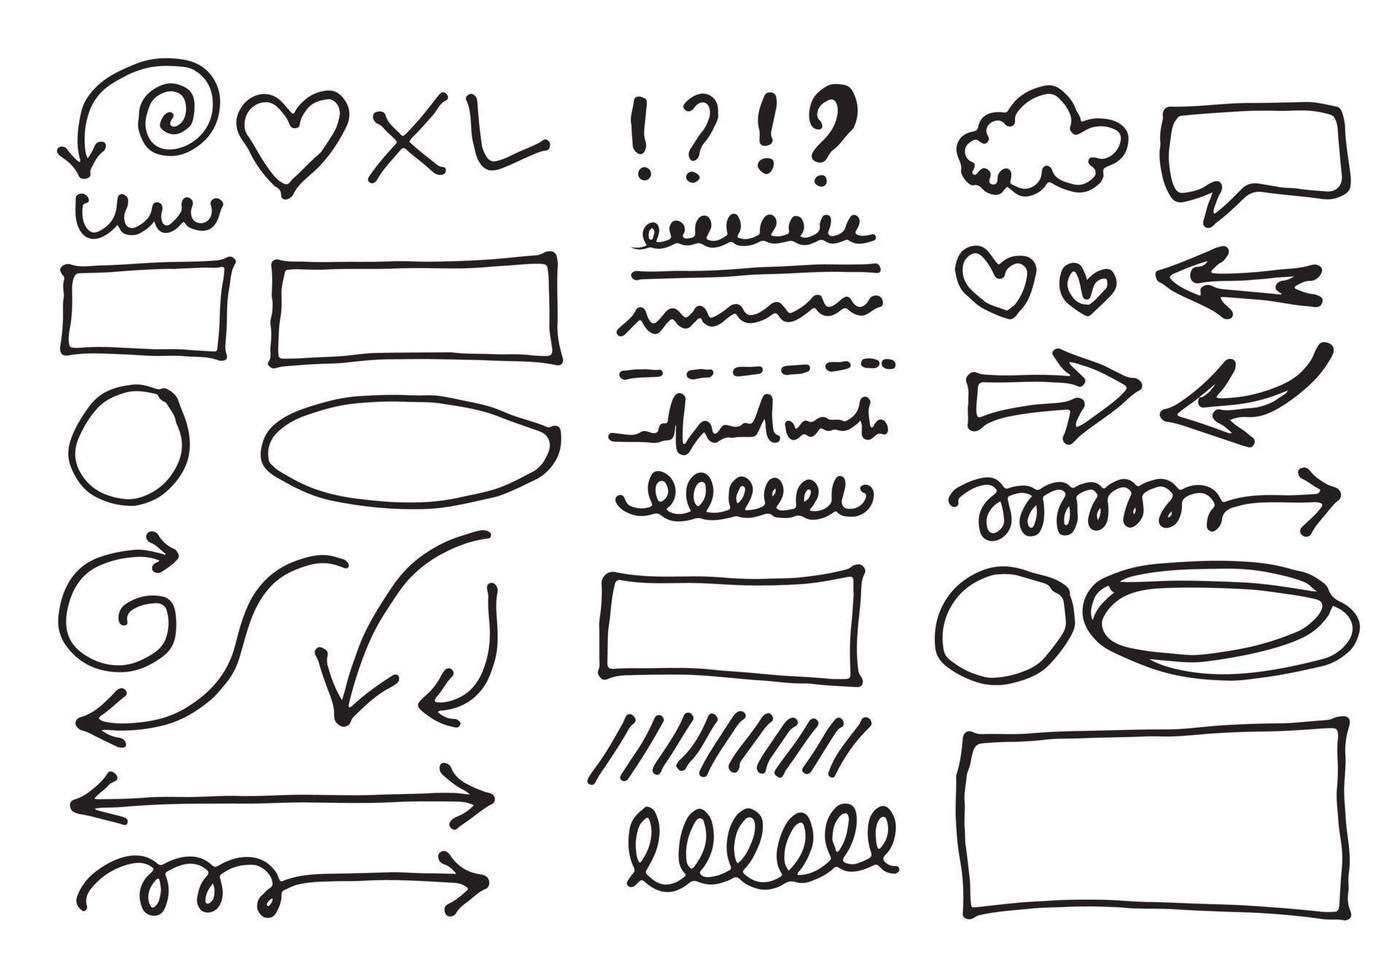 Doodle vector lines and curves.Hand drawn check and arrows signs. Set of simple doodle lines, curves, frames and spots. Collection of pencil effects. Doodle border. Simple doodle set.